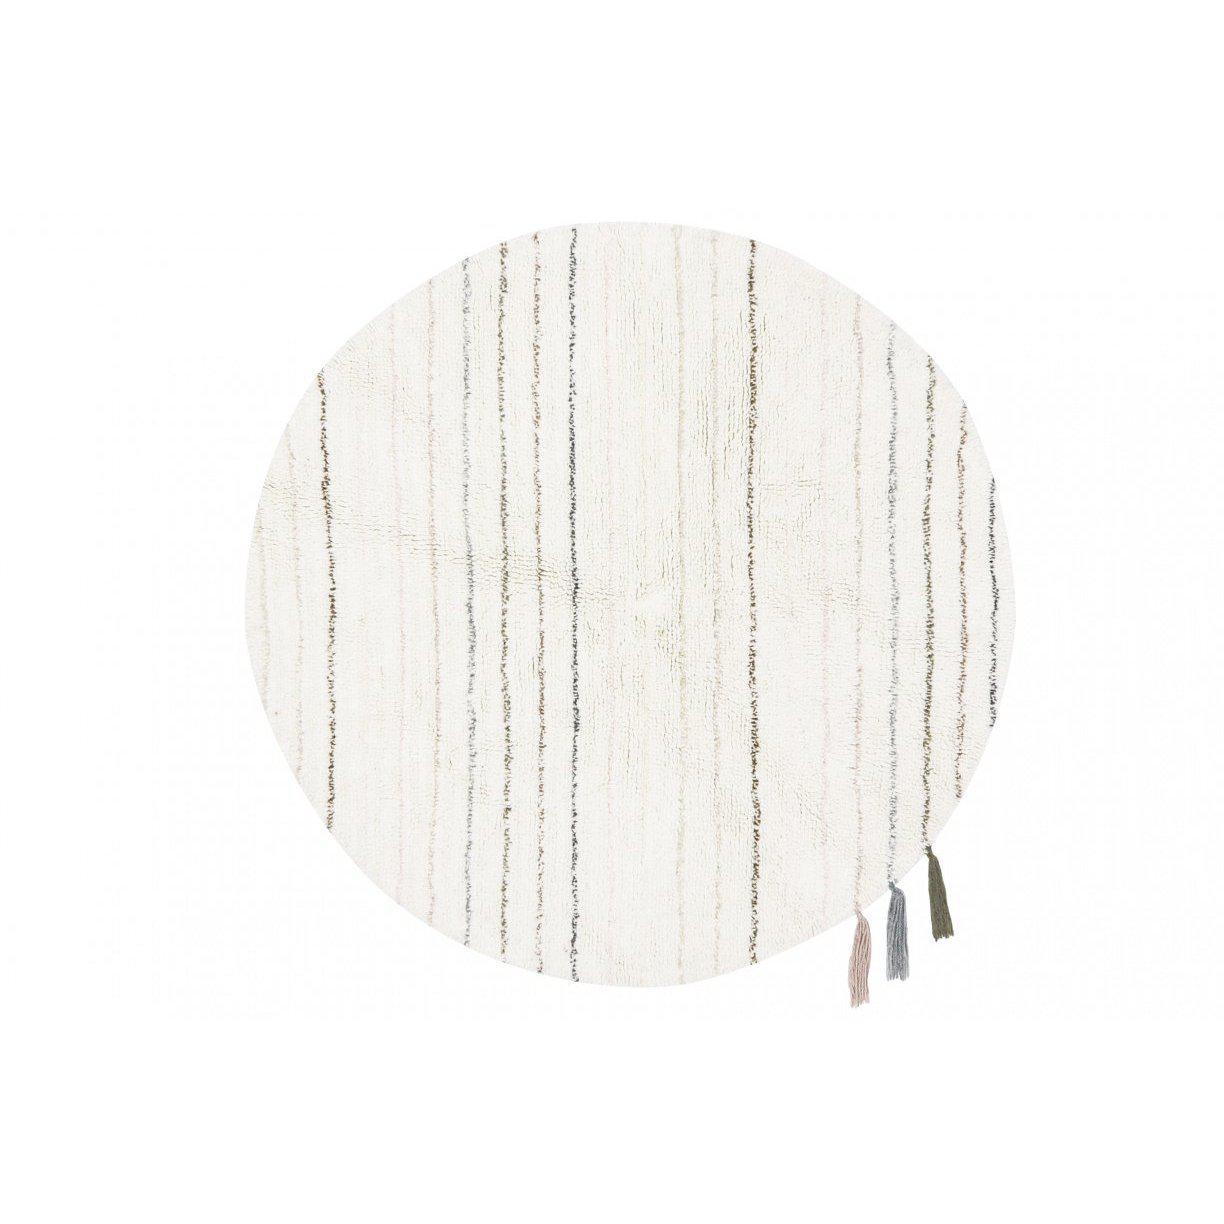 Rugs by Roo | Lorena Canals Arona Round Woolable Area Rug-WO-ARONA-C